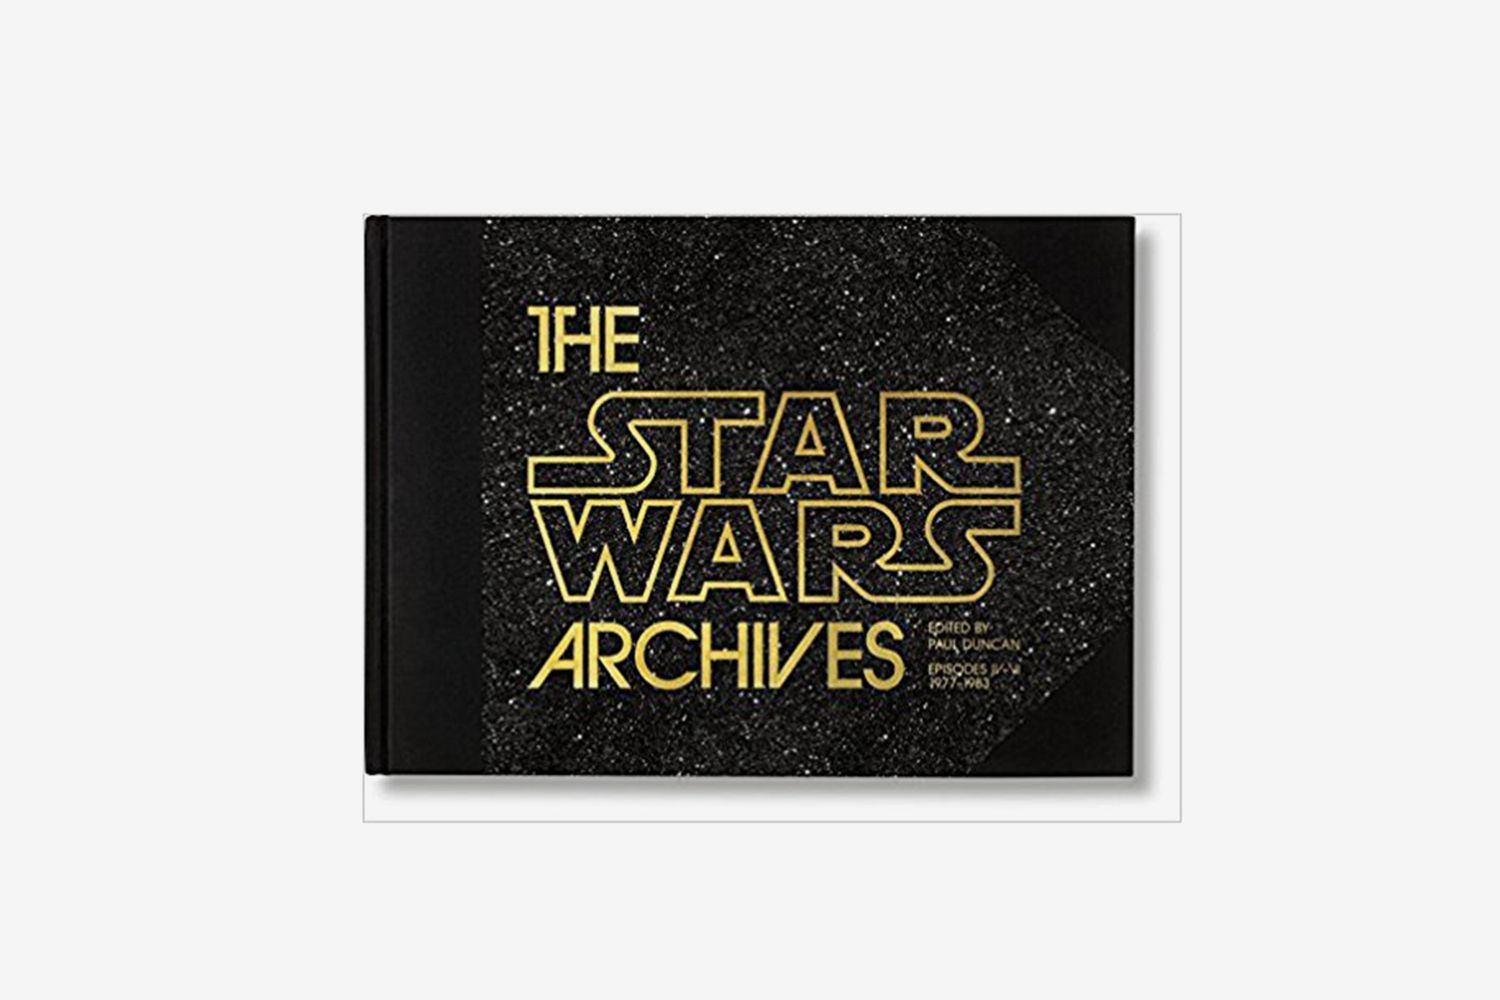 Paul Duncan : The Star Wars Archives 1977-1983